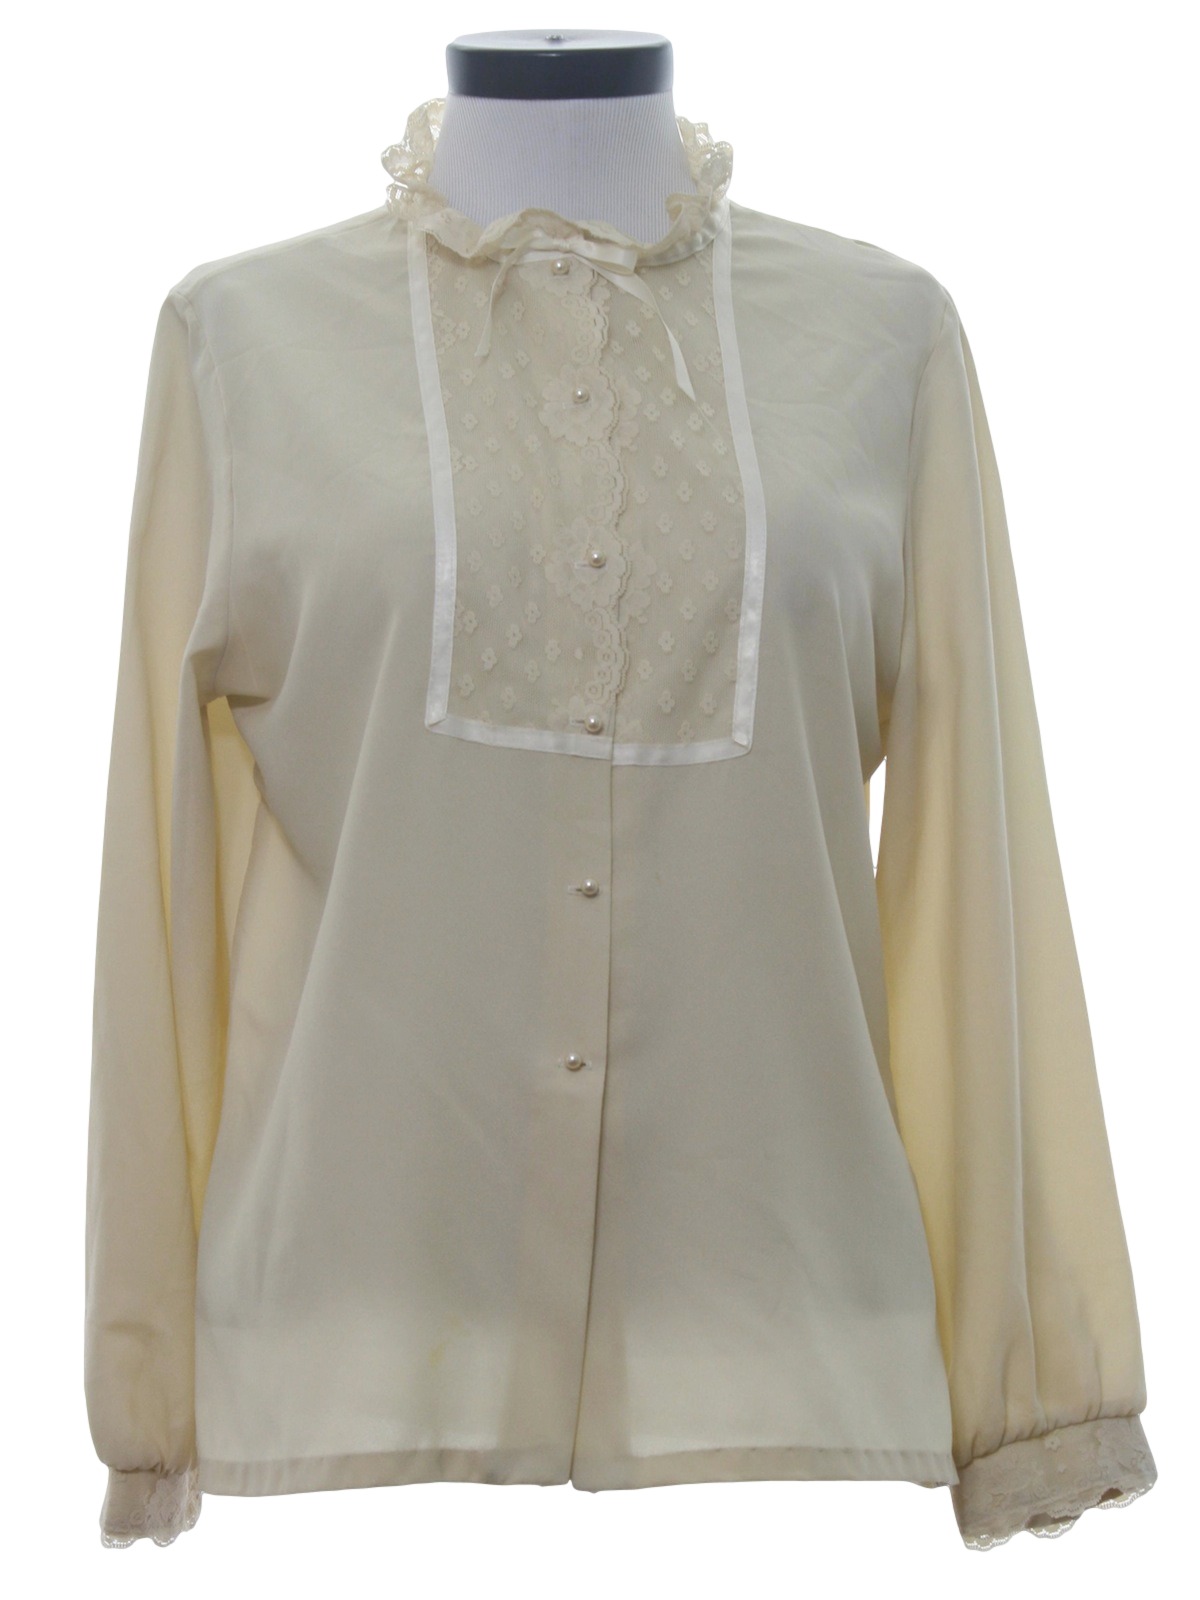 Vintage 1970's Shirt: 70s -no label- Womens beige background polyester ...